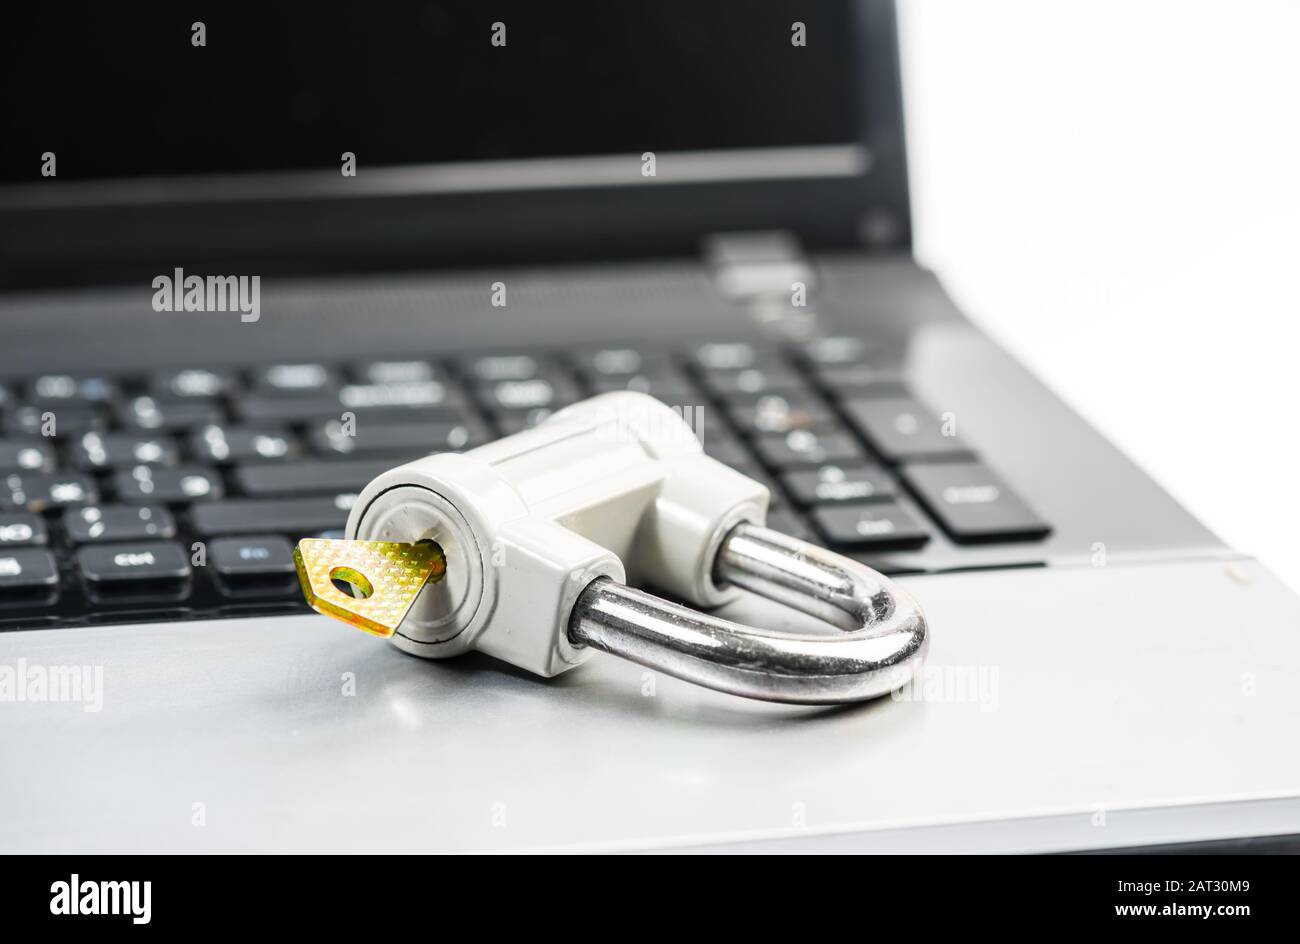 Computer security concept with a padlock on a laptop keyboard Stock Photo